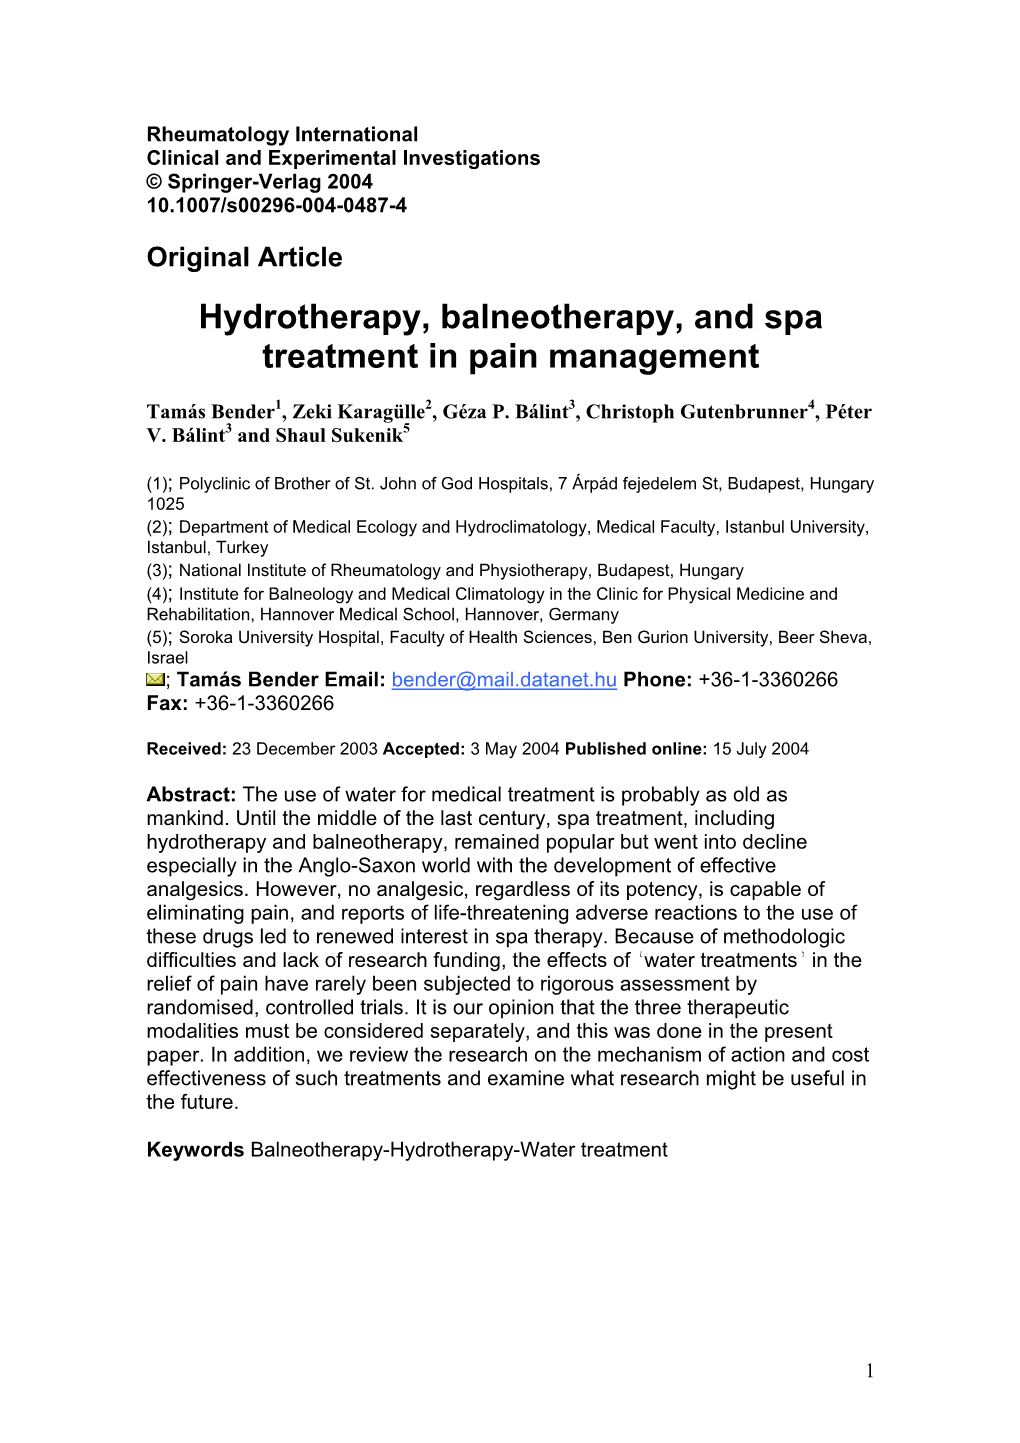 Hydrotherapy, Balneotherapy, and Spa Treatment in Pain Management